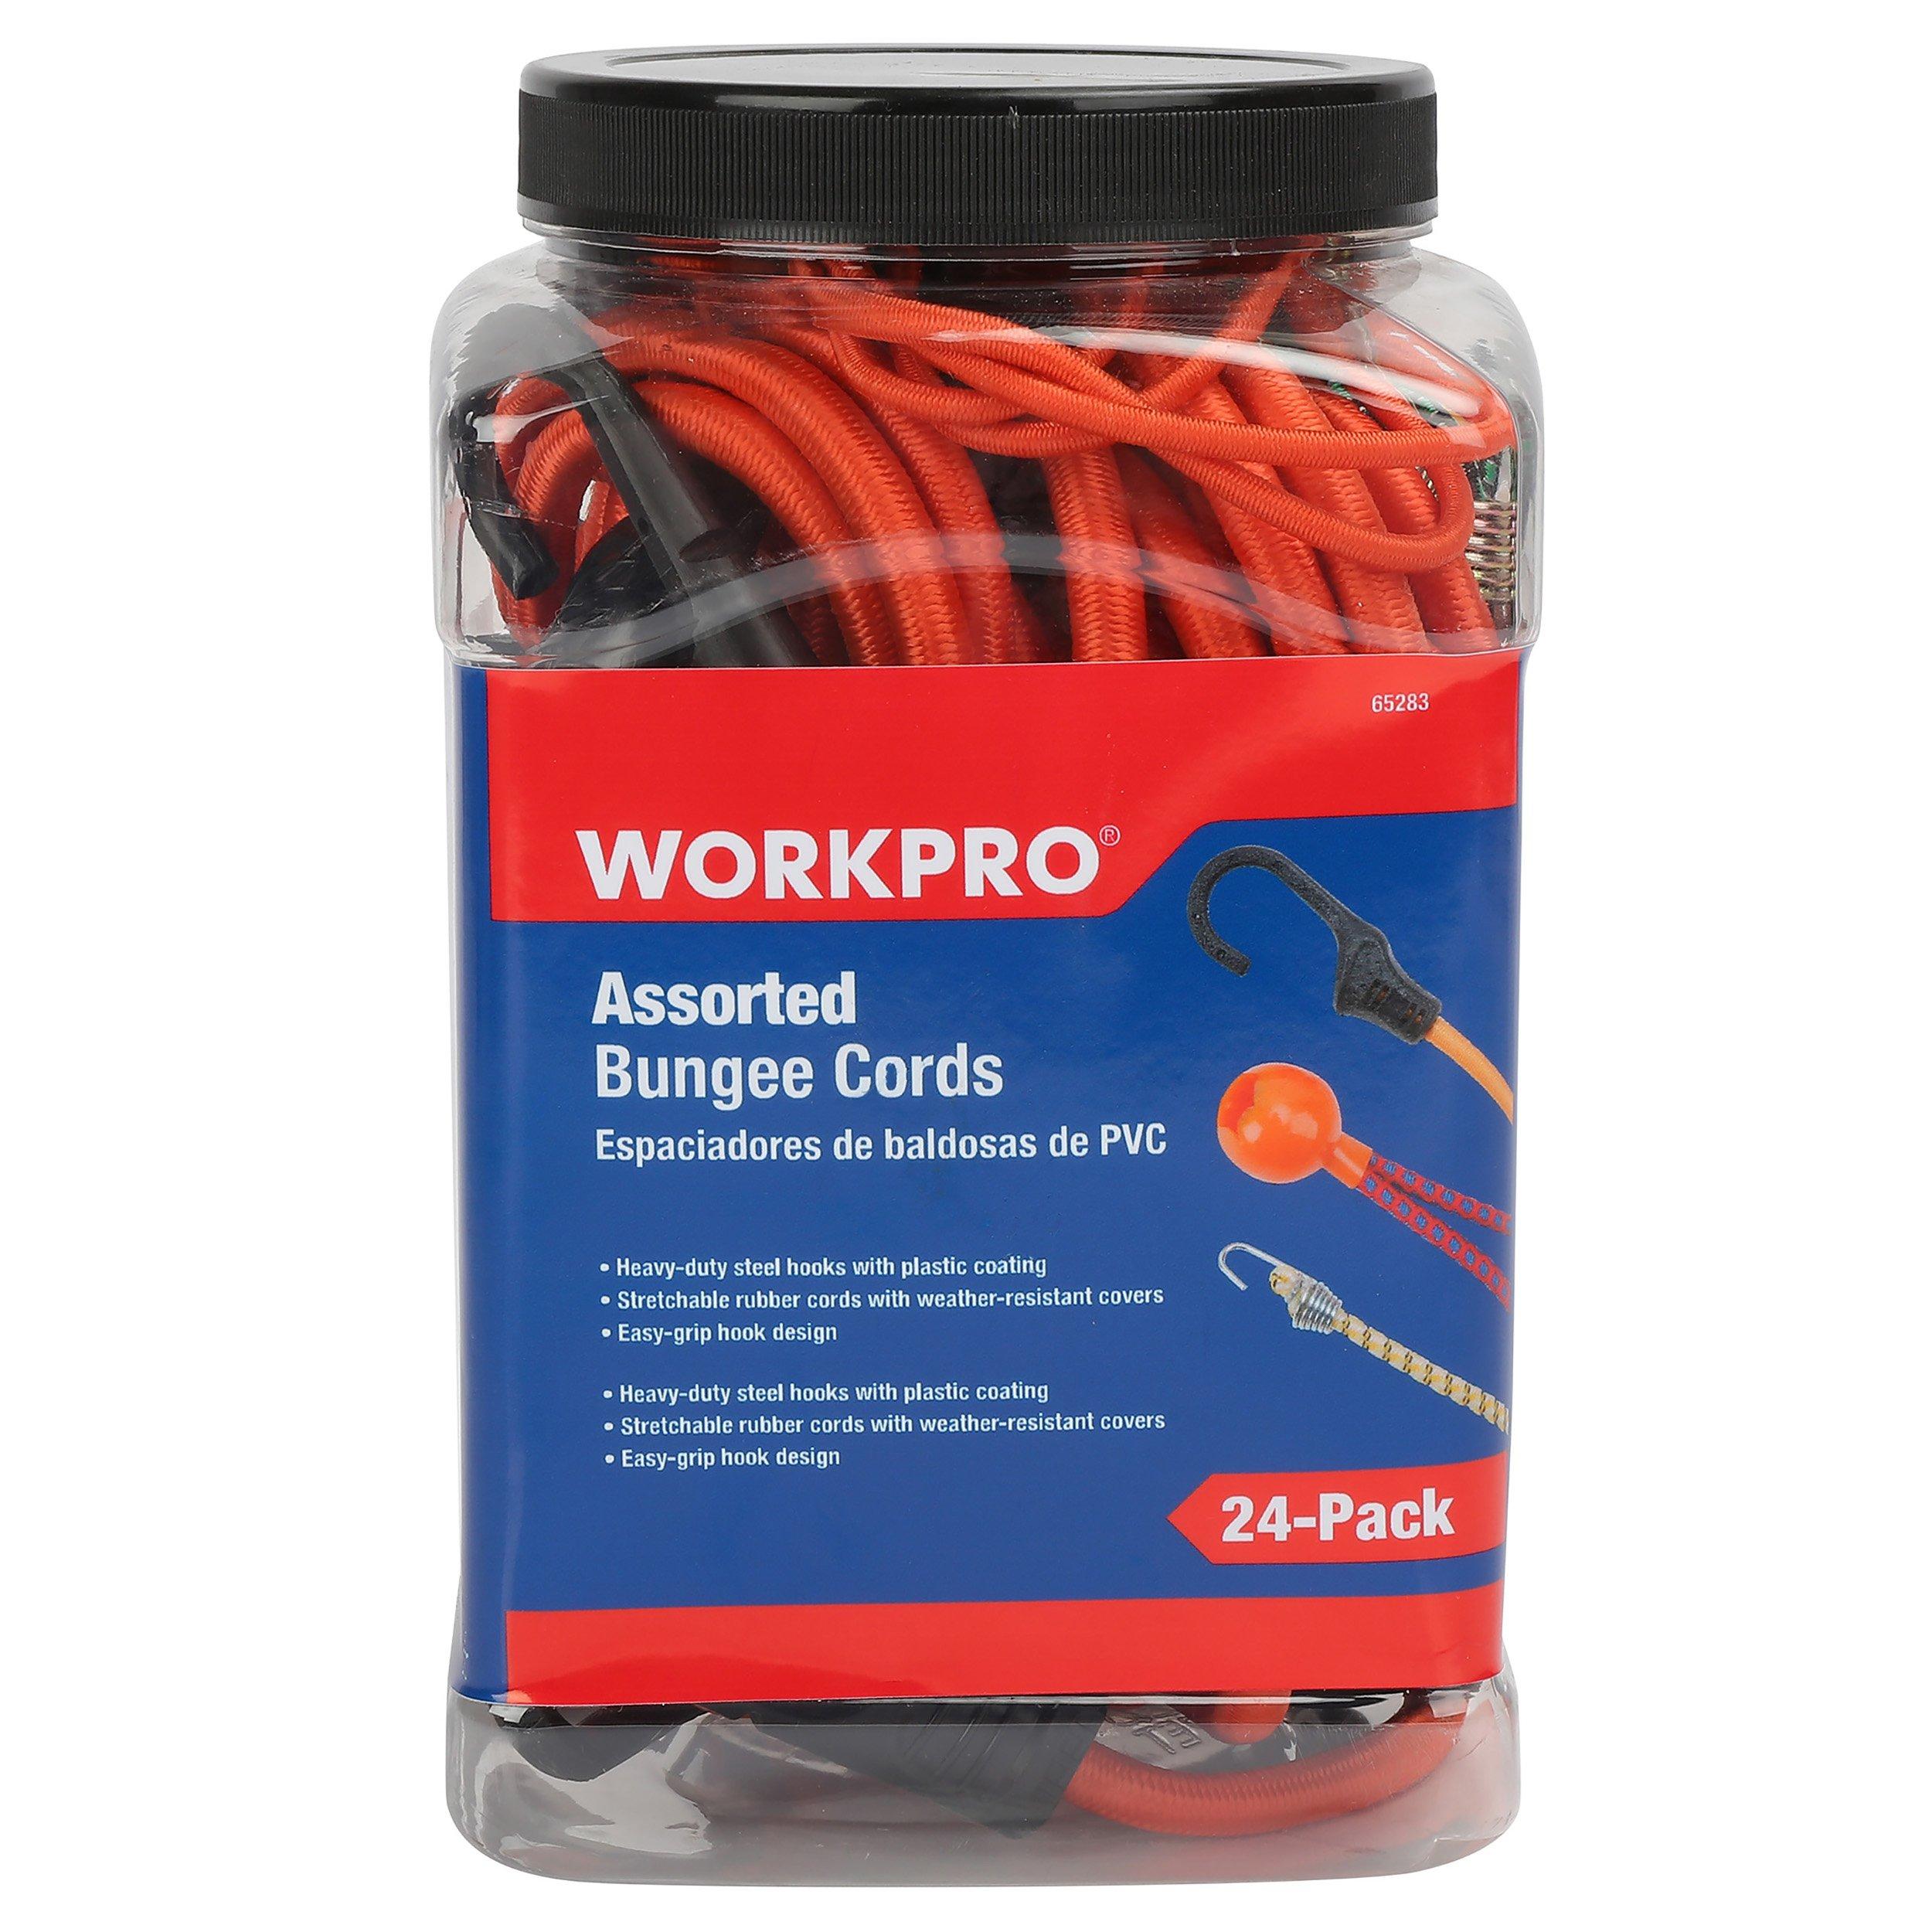 Work Pro Assorted Bungee Cords - 24pk.